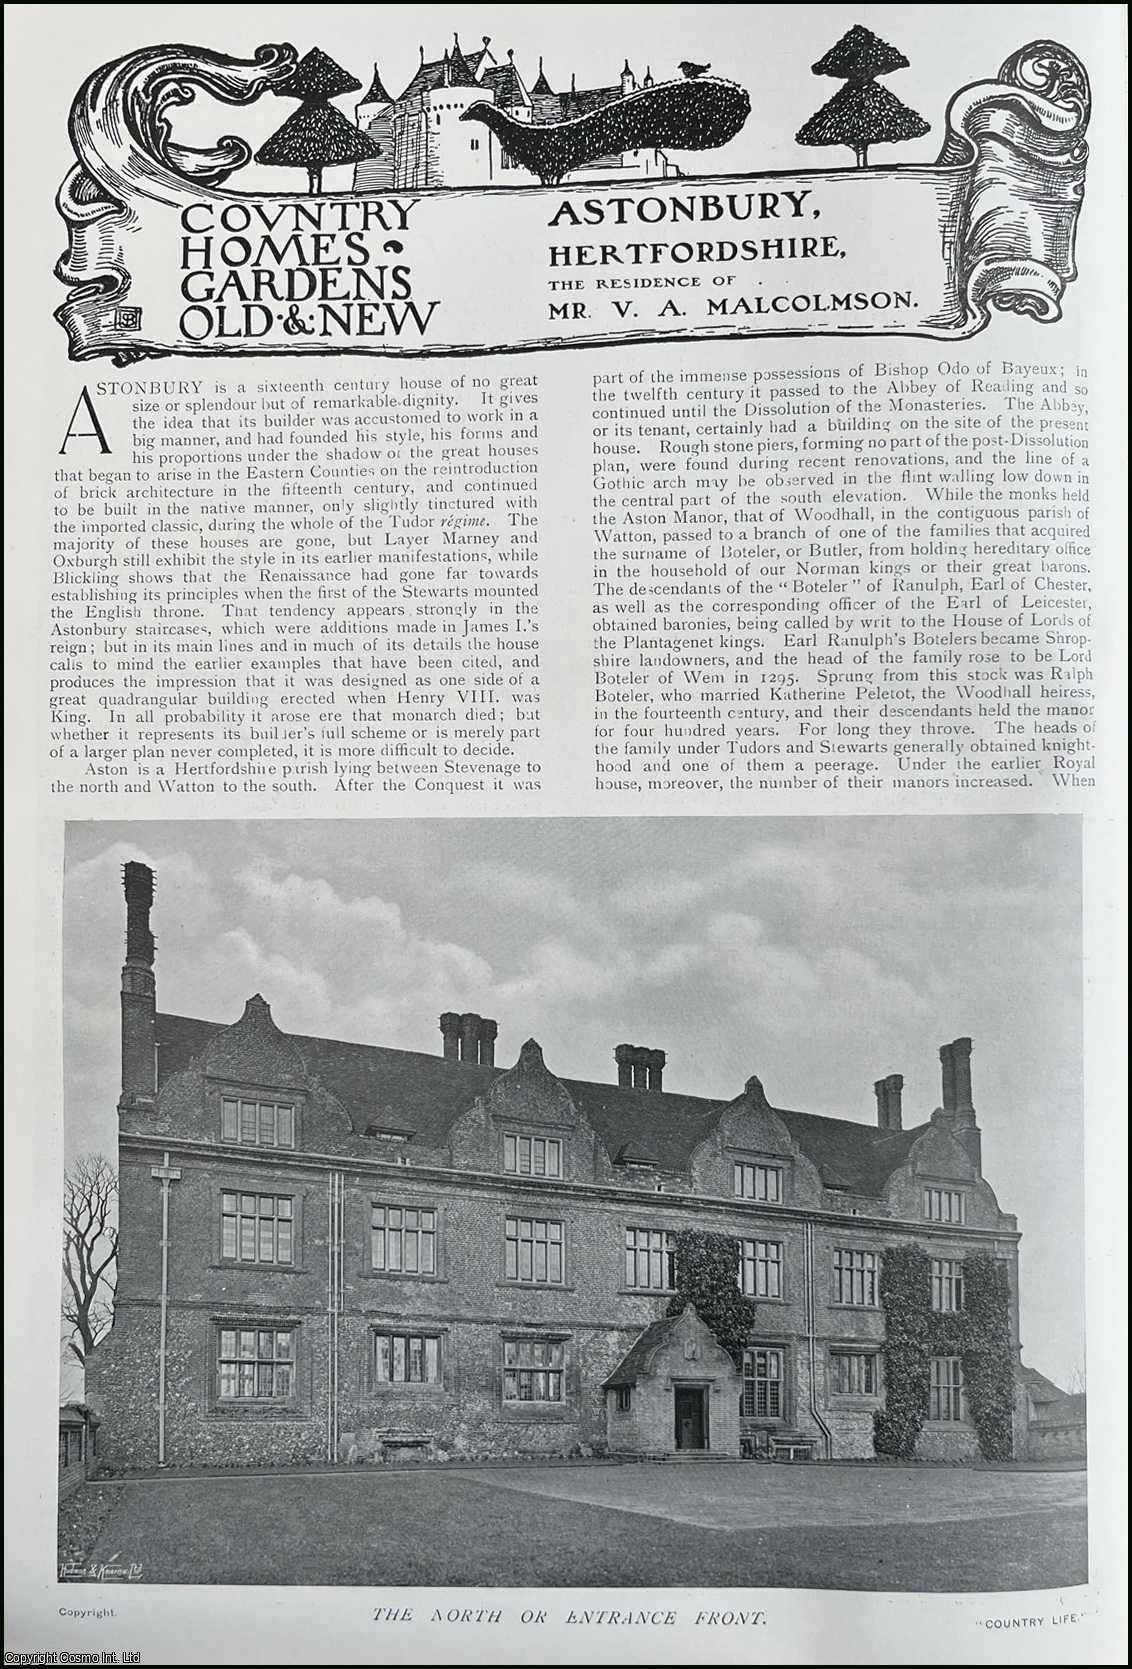 Country Life Magazine - Astonbury, Hertfordshire. The Residence of Mr. V.A. Malcolmson. Several pictures and accompanying text, removed from an original issue of Country Life Magazine, 1910.